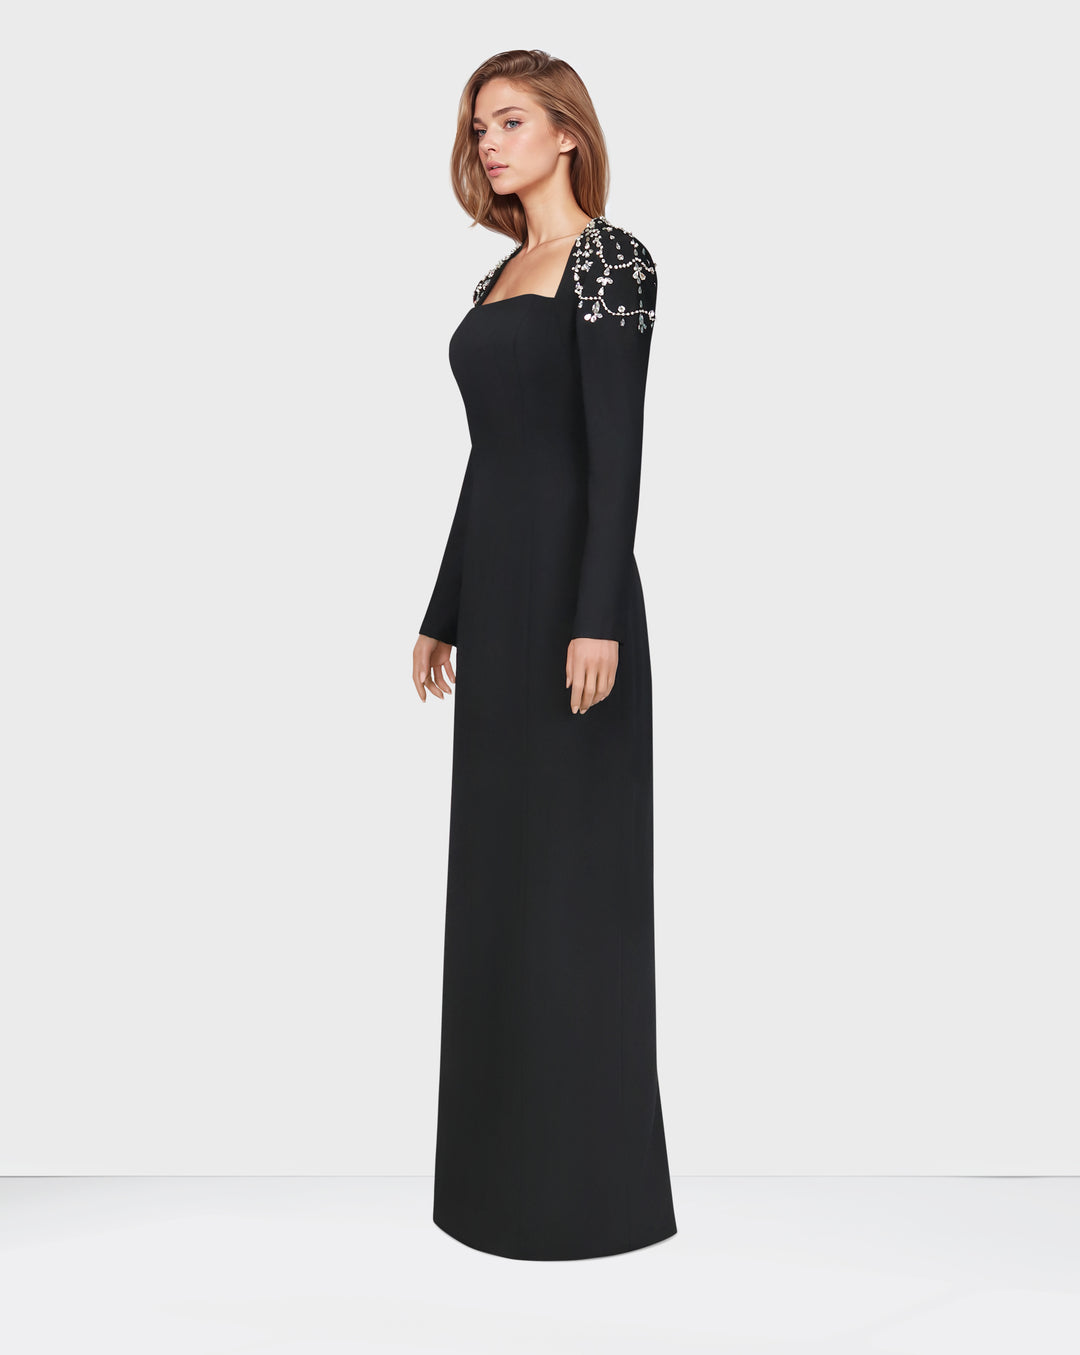 Black column dress with beaded shoulders and long sleeves - Telqo